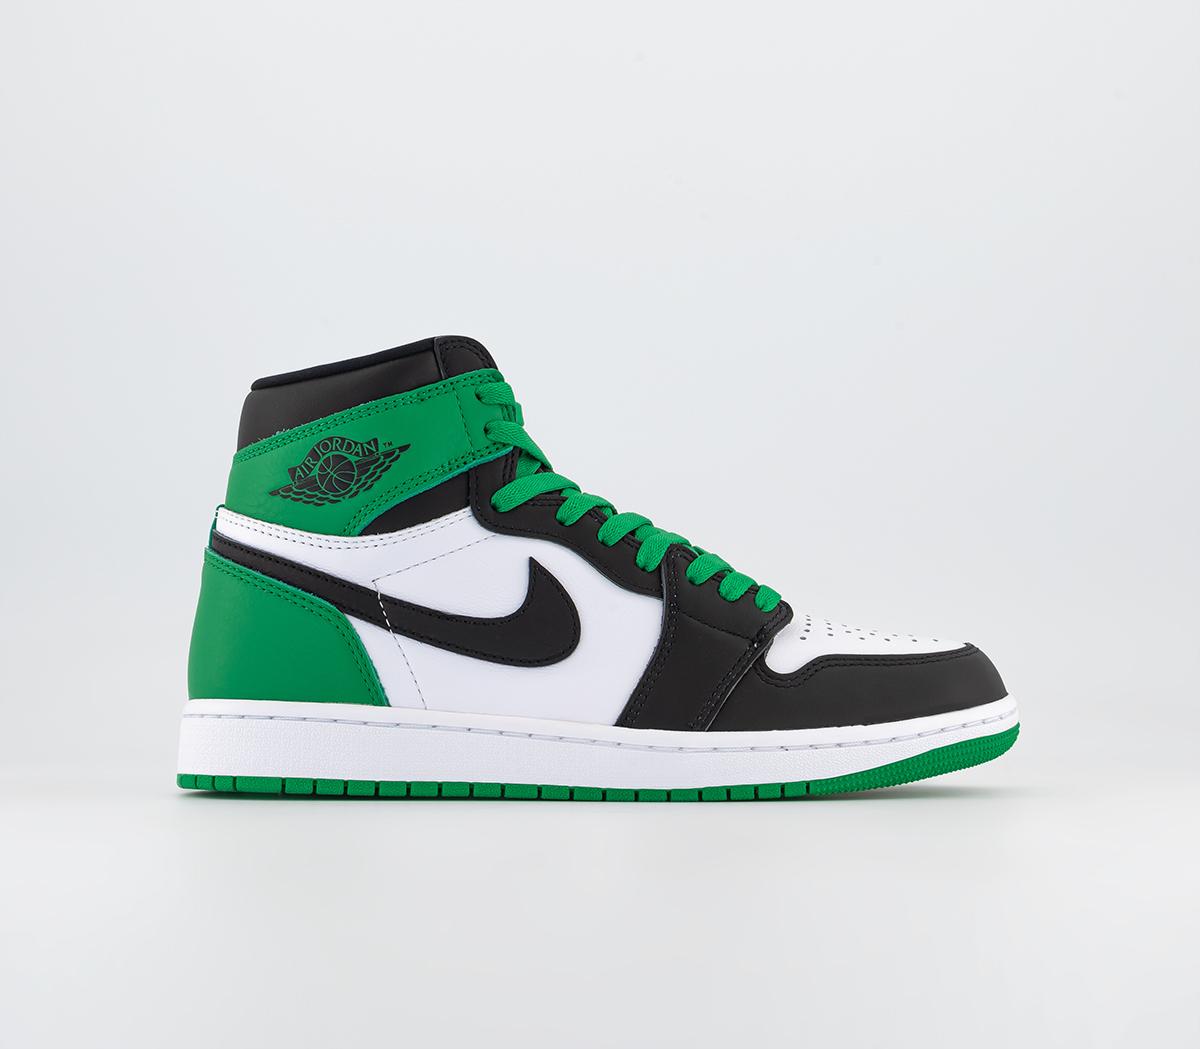 Jordan Air 1 High Trainers Lucky Green Black Toe Leather, 8